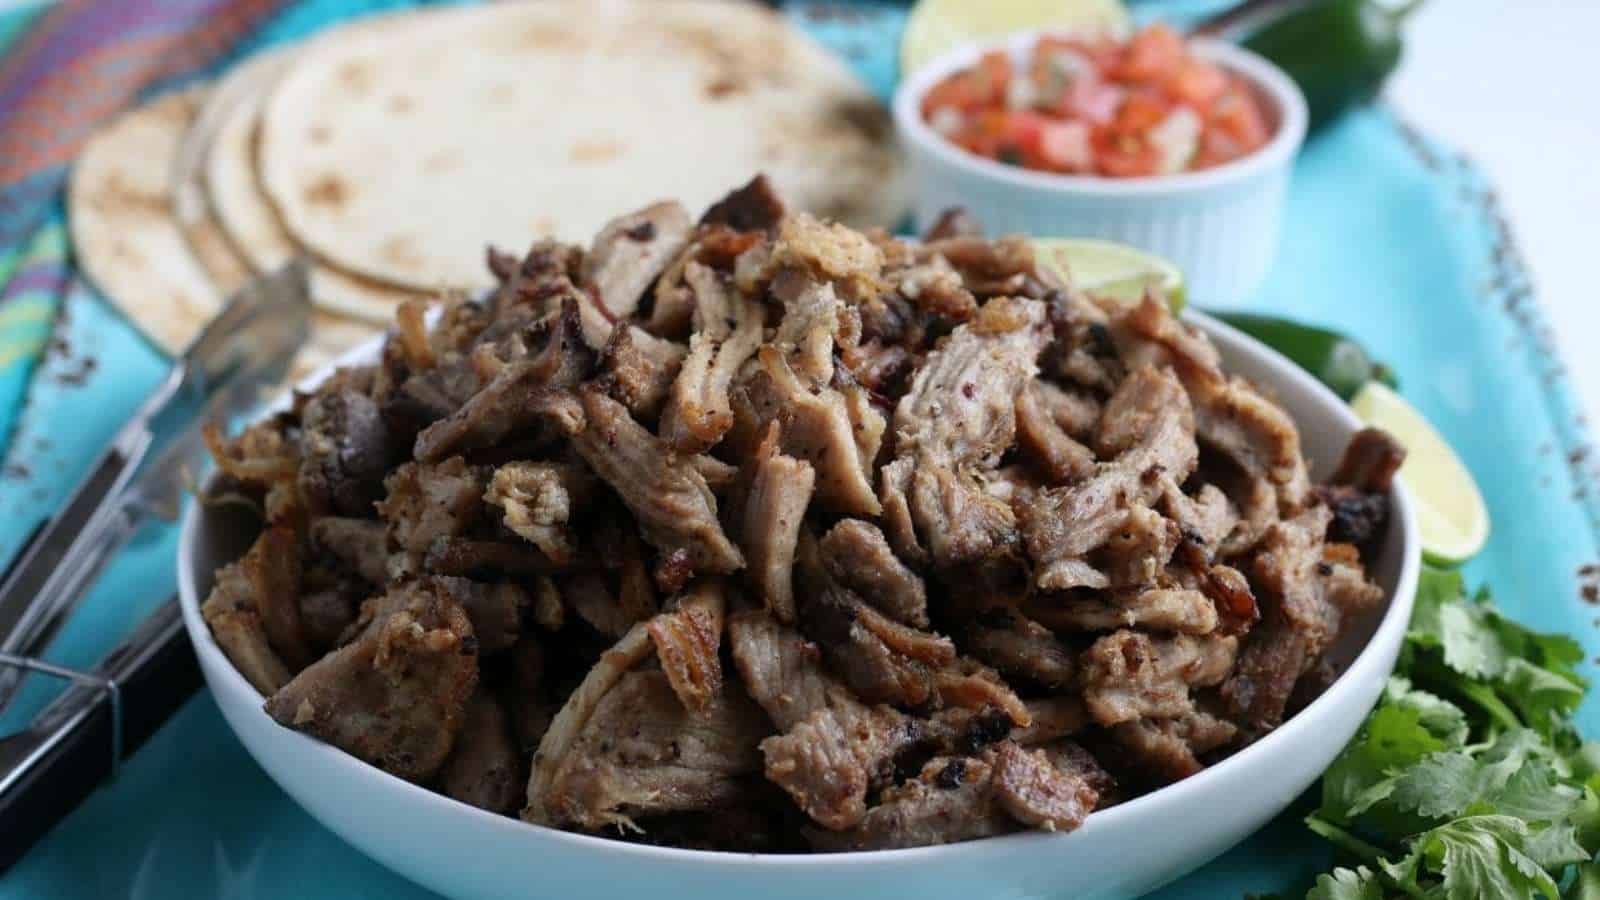 Shredded pork in a white bowl with limes and tortillas.